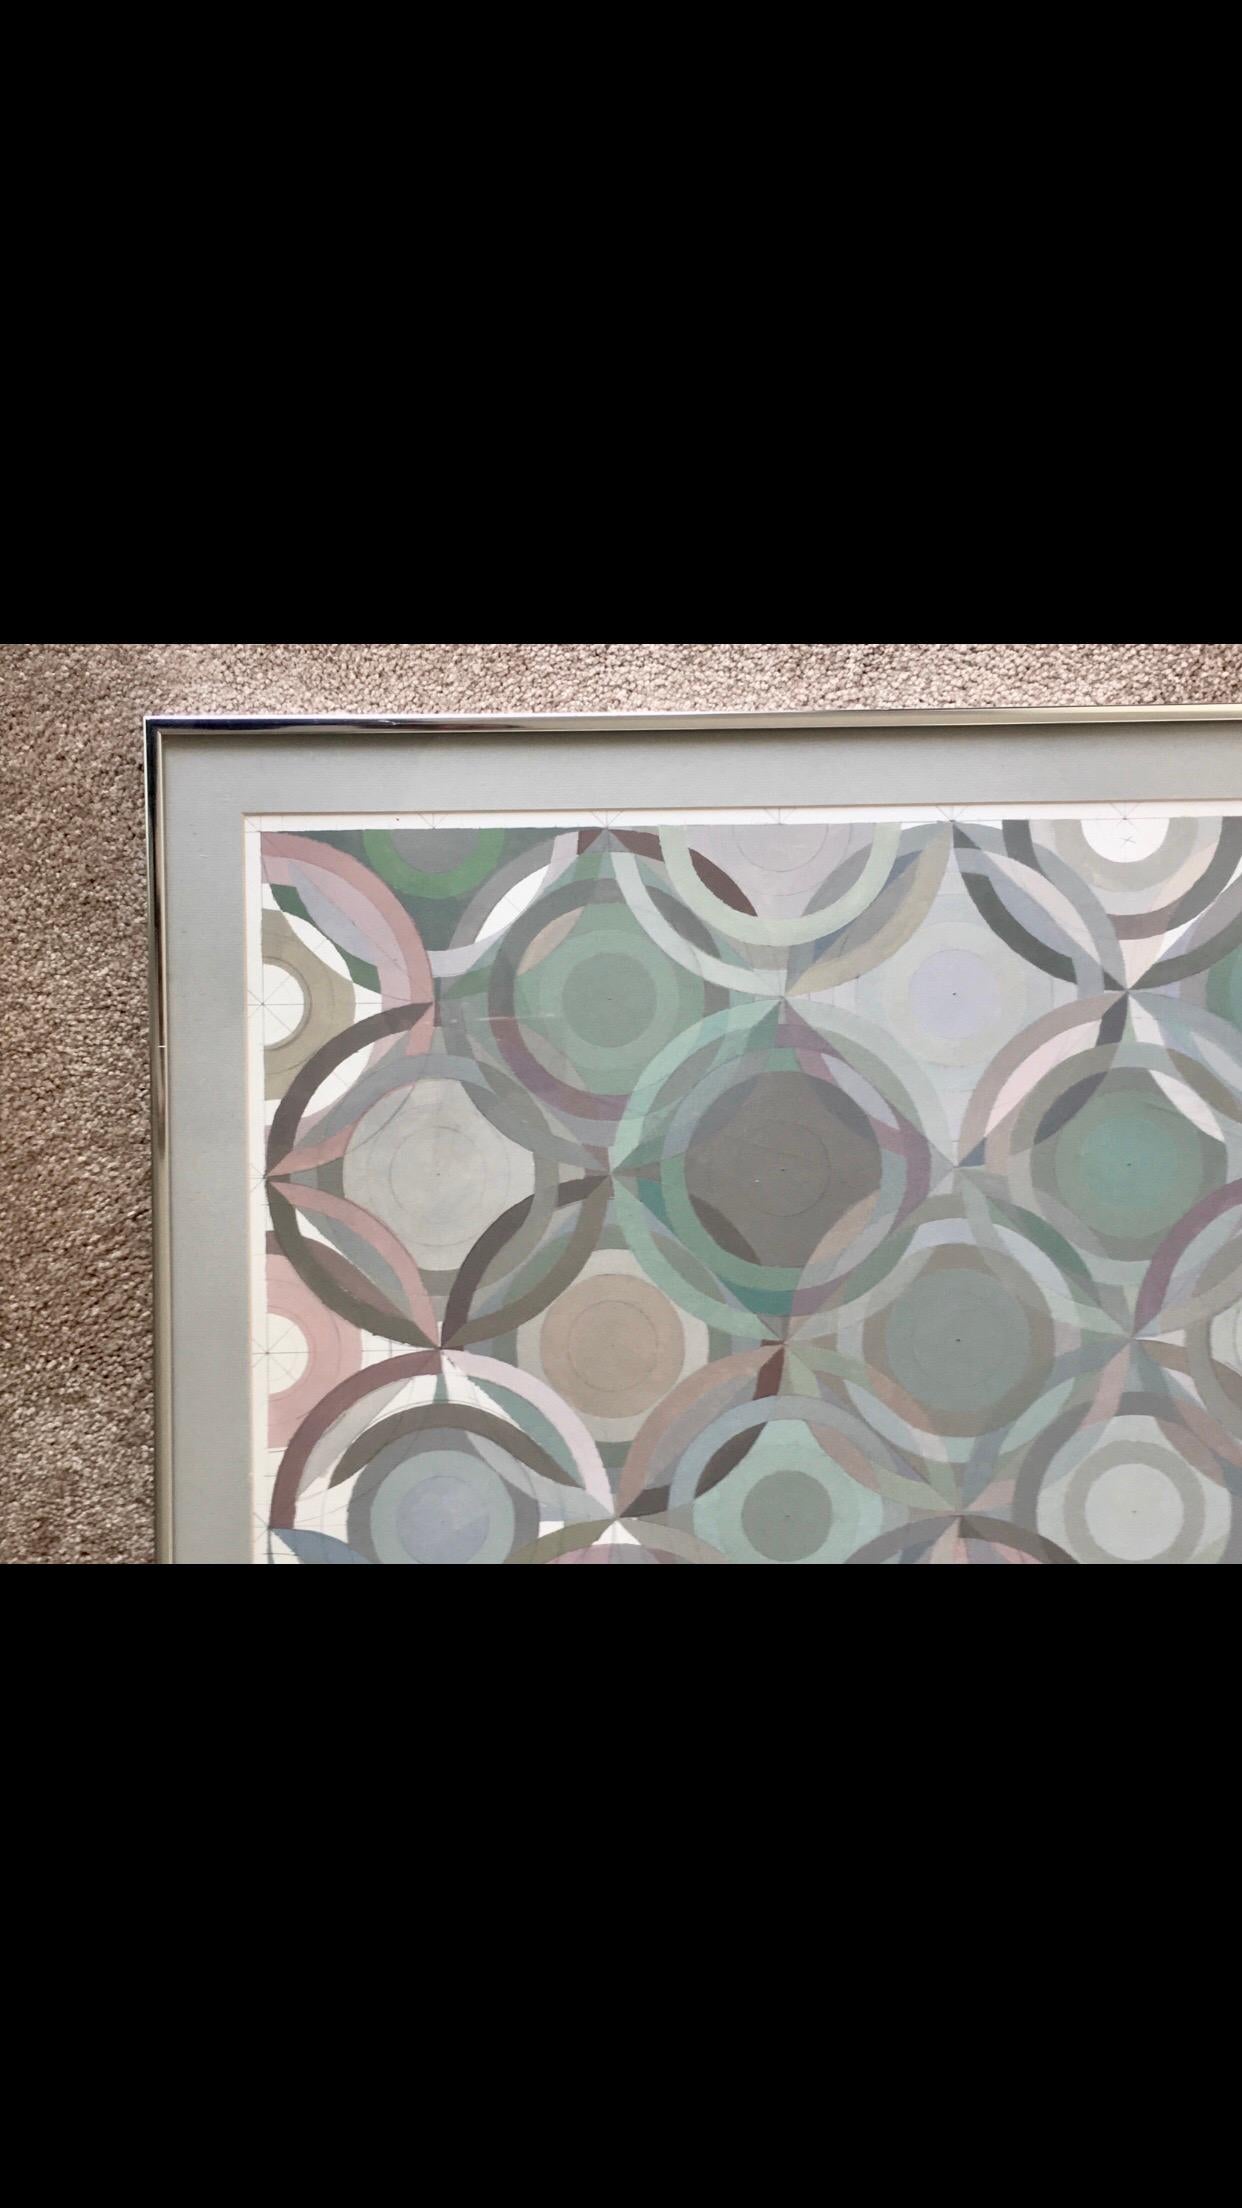 Brushed Framed Abstract Geometric Gouache on Paper by Stevan Kissel For Sale